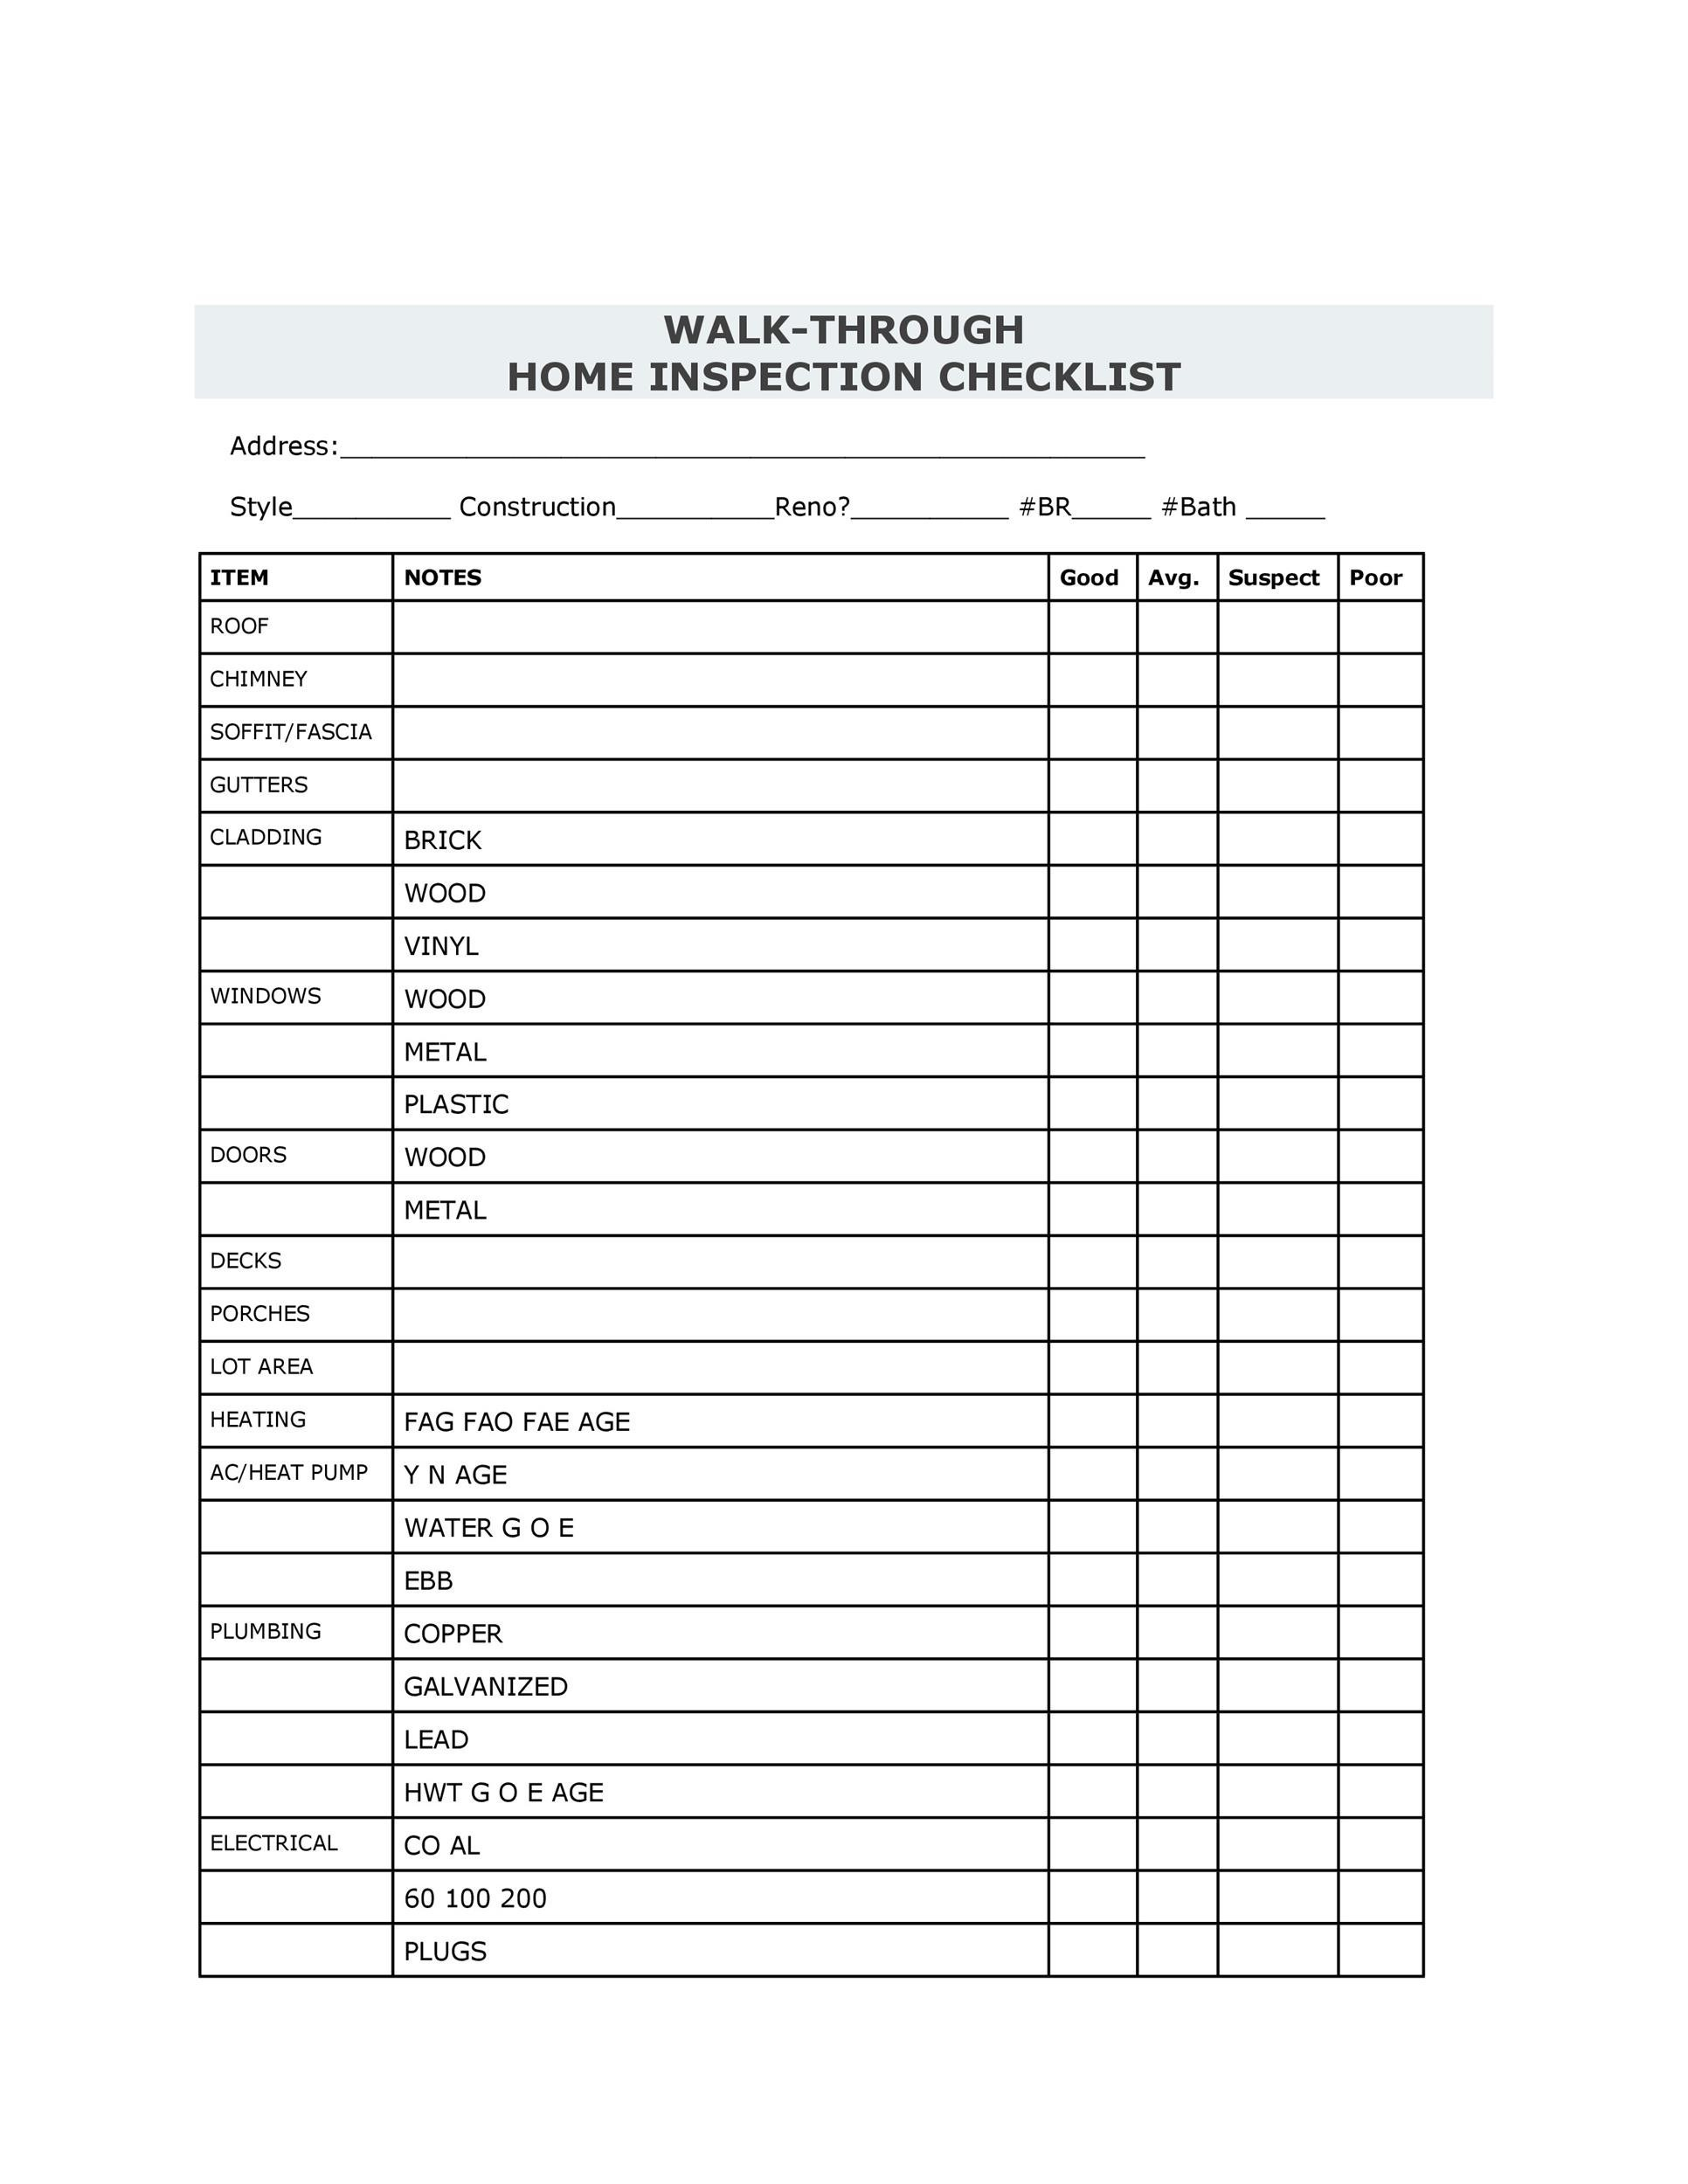 Home inspection checklist ontario pdf With Home Inspection Checklist Template Intended For Home Inspection Checklist Template